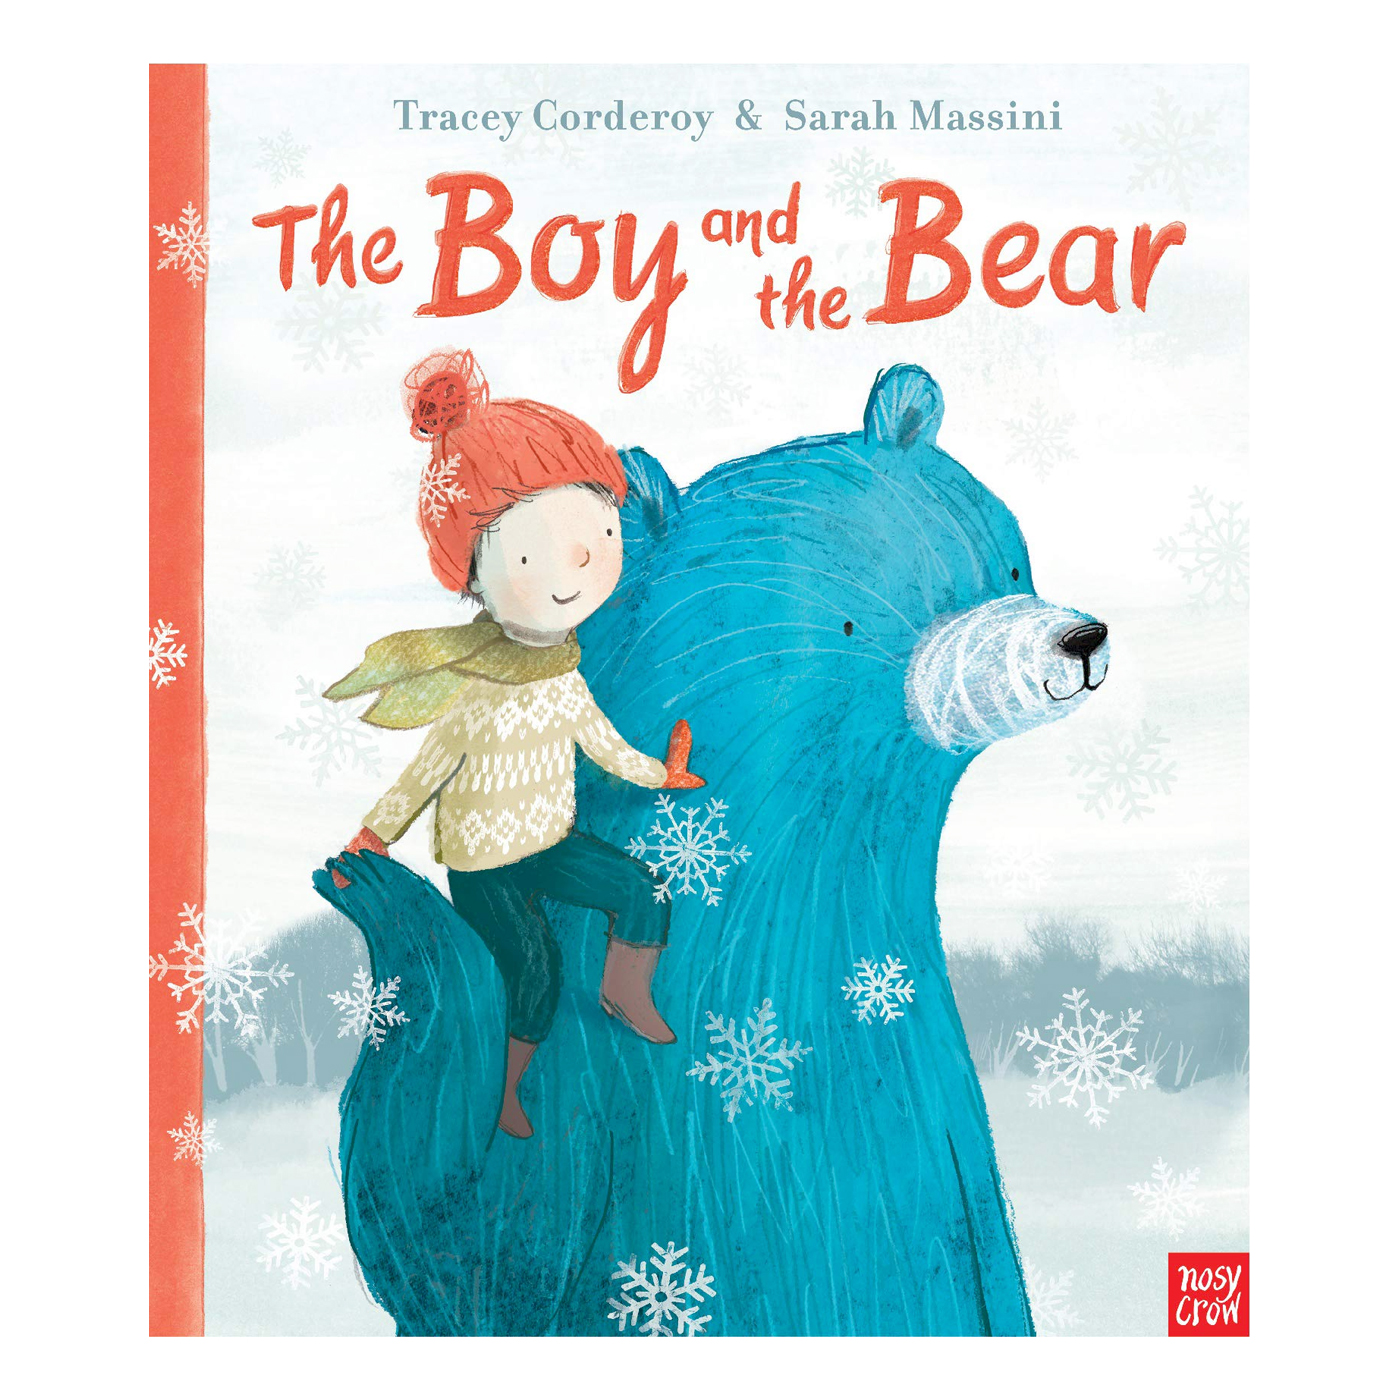  The Boy and the Bear